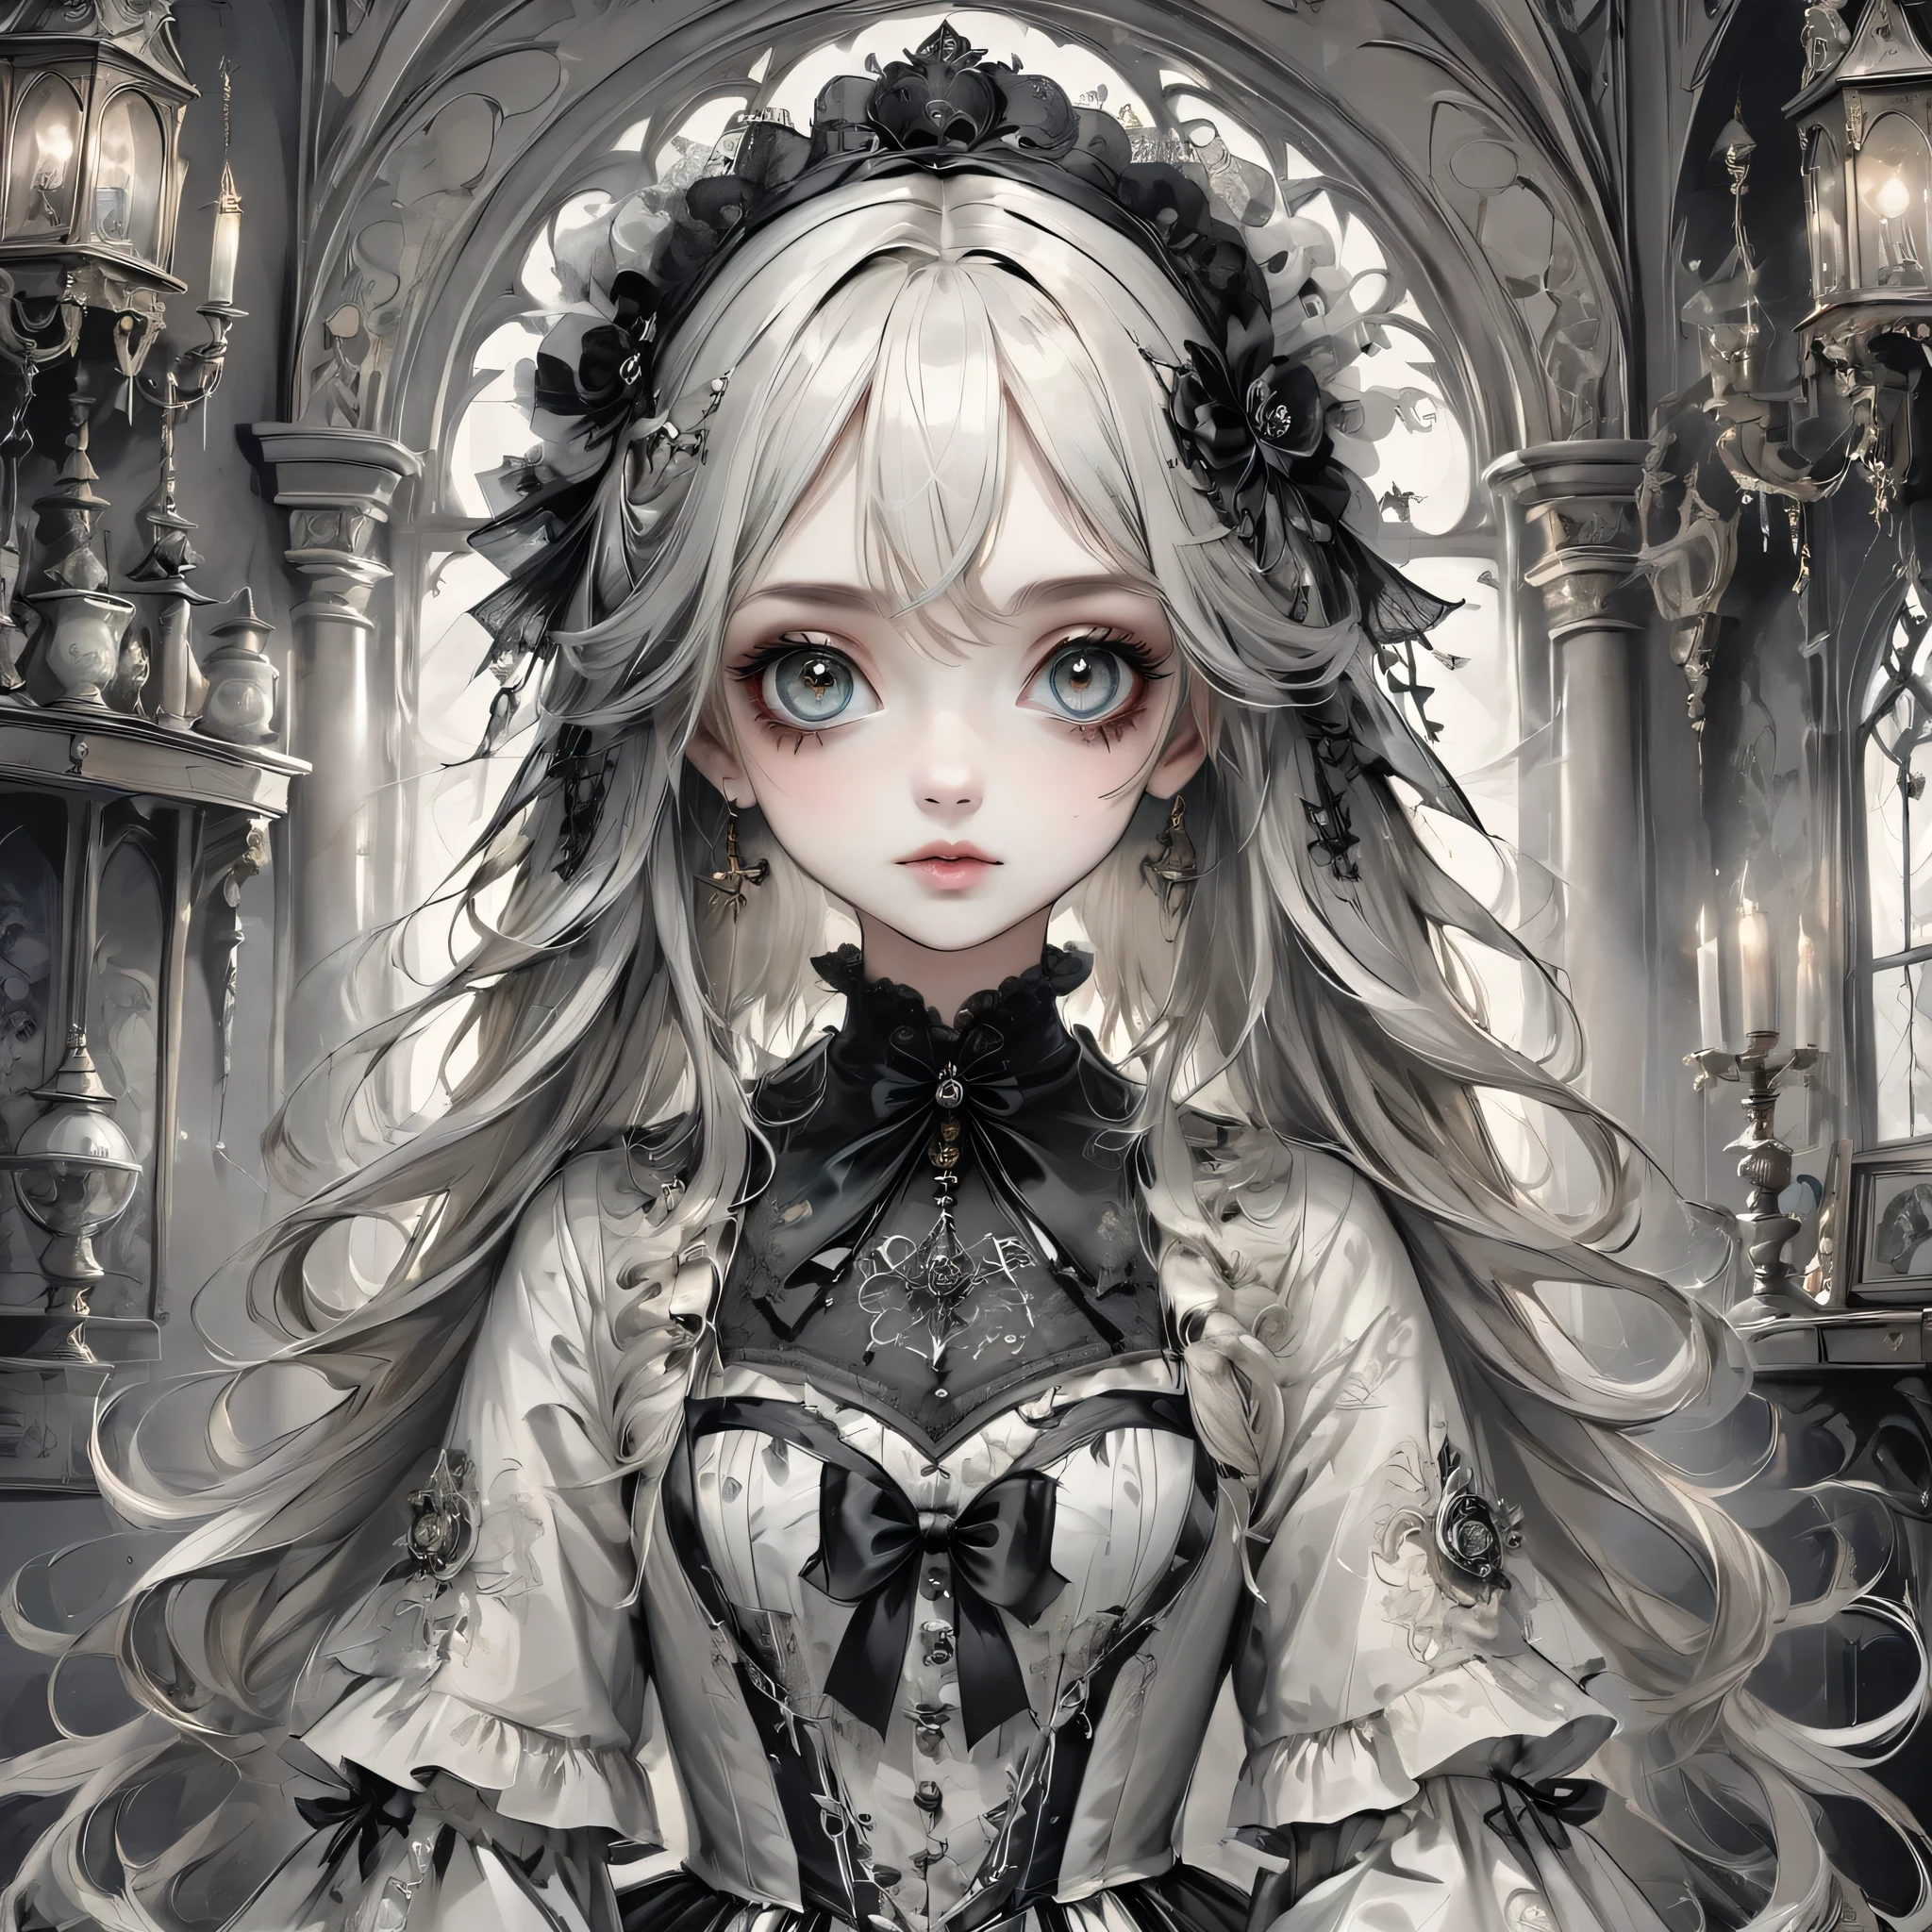 Gothic horror paintings,((Beautiful girl standing:Gothic Lolita:12 years old:Ephemeral:beautiful girl:cute:Adorable:Perfect Face:white:eyelash:Big eyes)),Gothic House,Recall,Black and white,scary but beautiful,Gothic Beauty,Expressing beautiful madness,Shrouded in mystery,Placing dark clouds that foreshadow tragedy in a beautiful gothic house,,detailed,Use red as an accent color,Race,embroidery,Detailed patterns,rendering,Designer House,Luxury Homes,Nice,quiet,Beautiful light and shadow,Gothic Room,Golden Ratio,Anatomically correct,Rococo